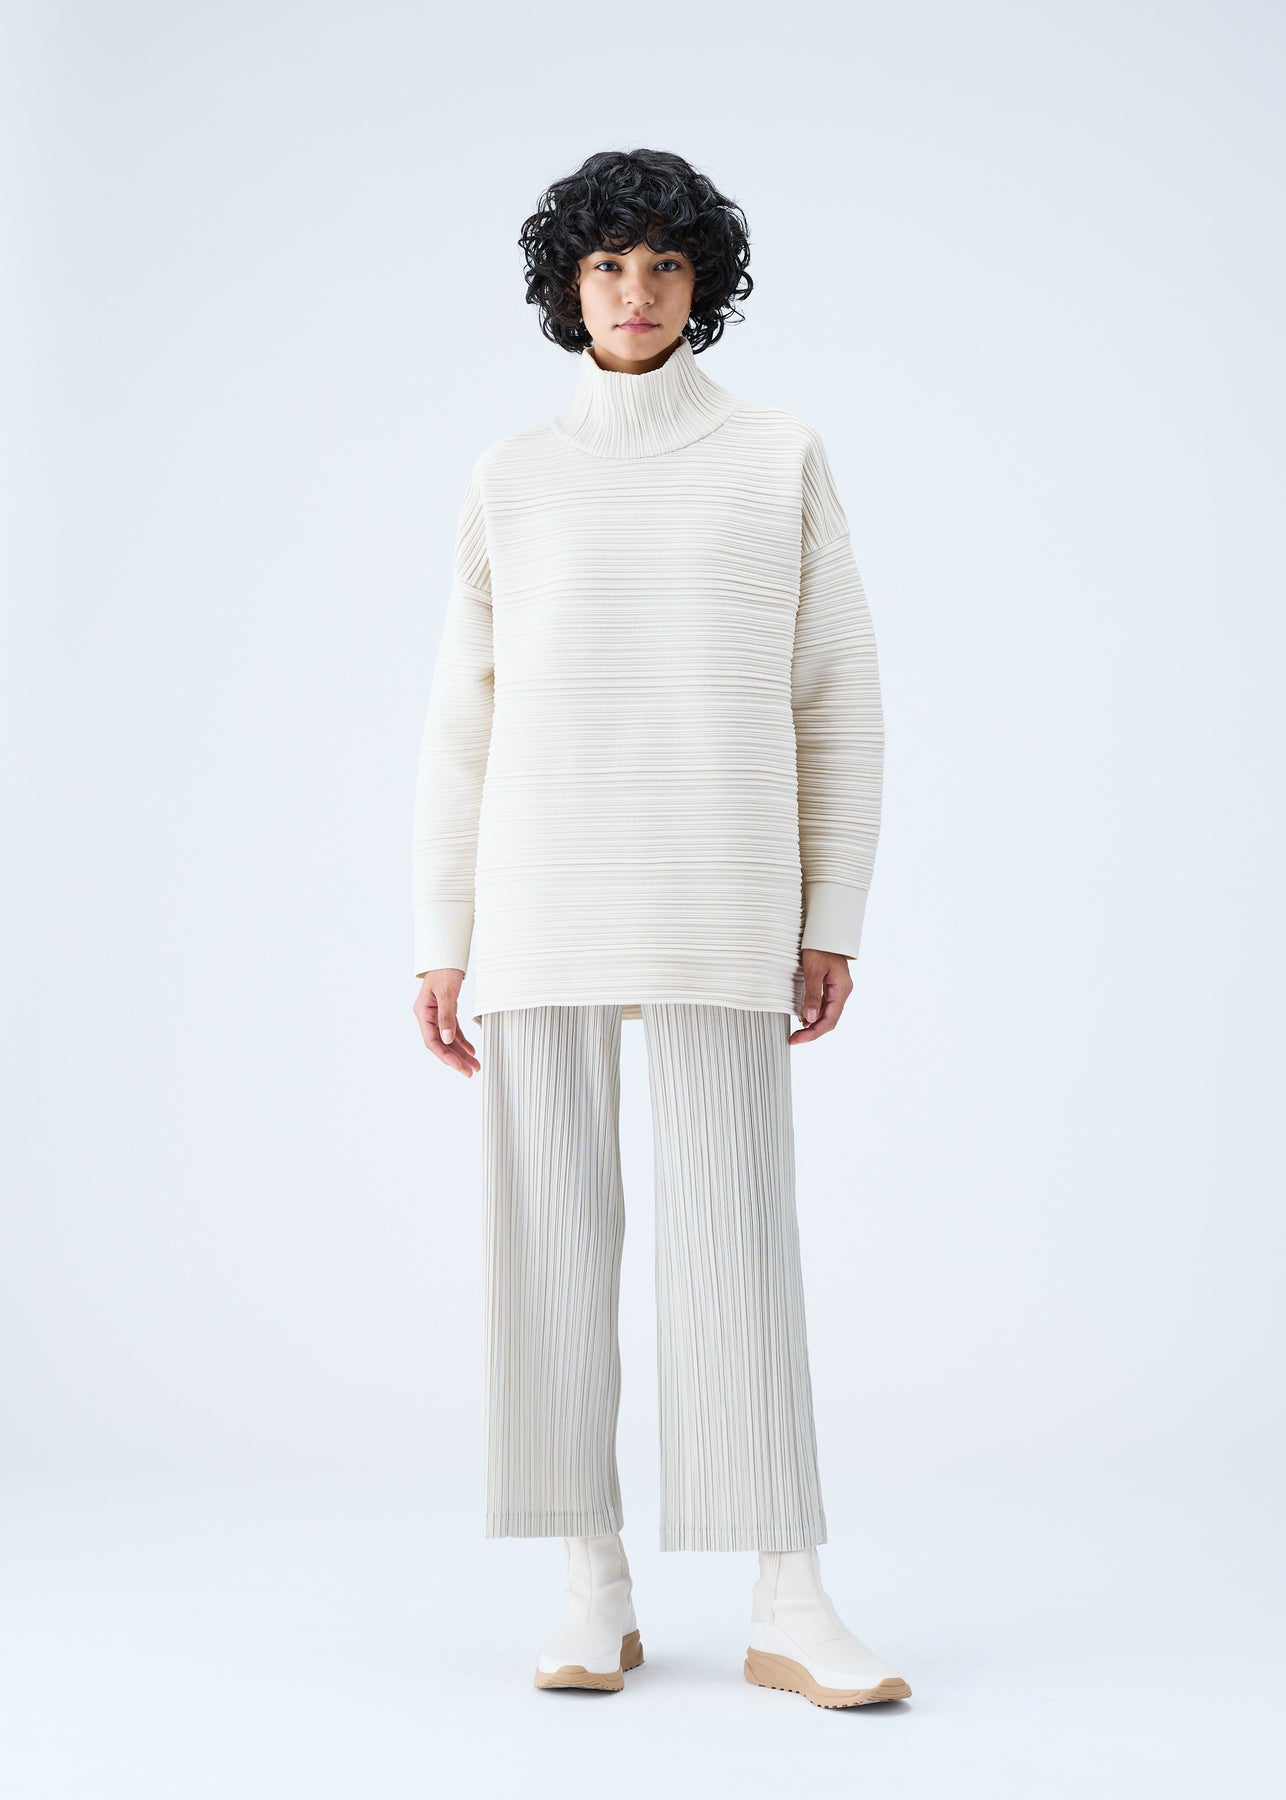 CREPE KNIT TOP | The official ISSEY MIYAKE ONLINE STORE | ISSEY